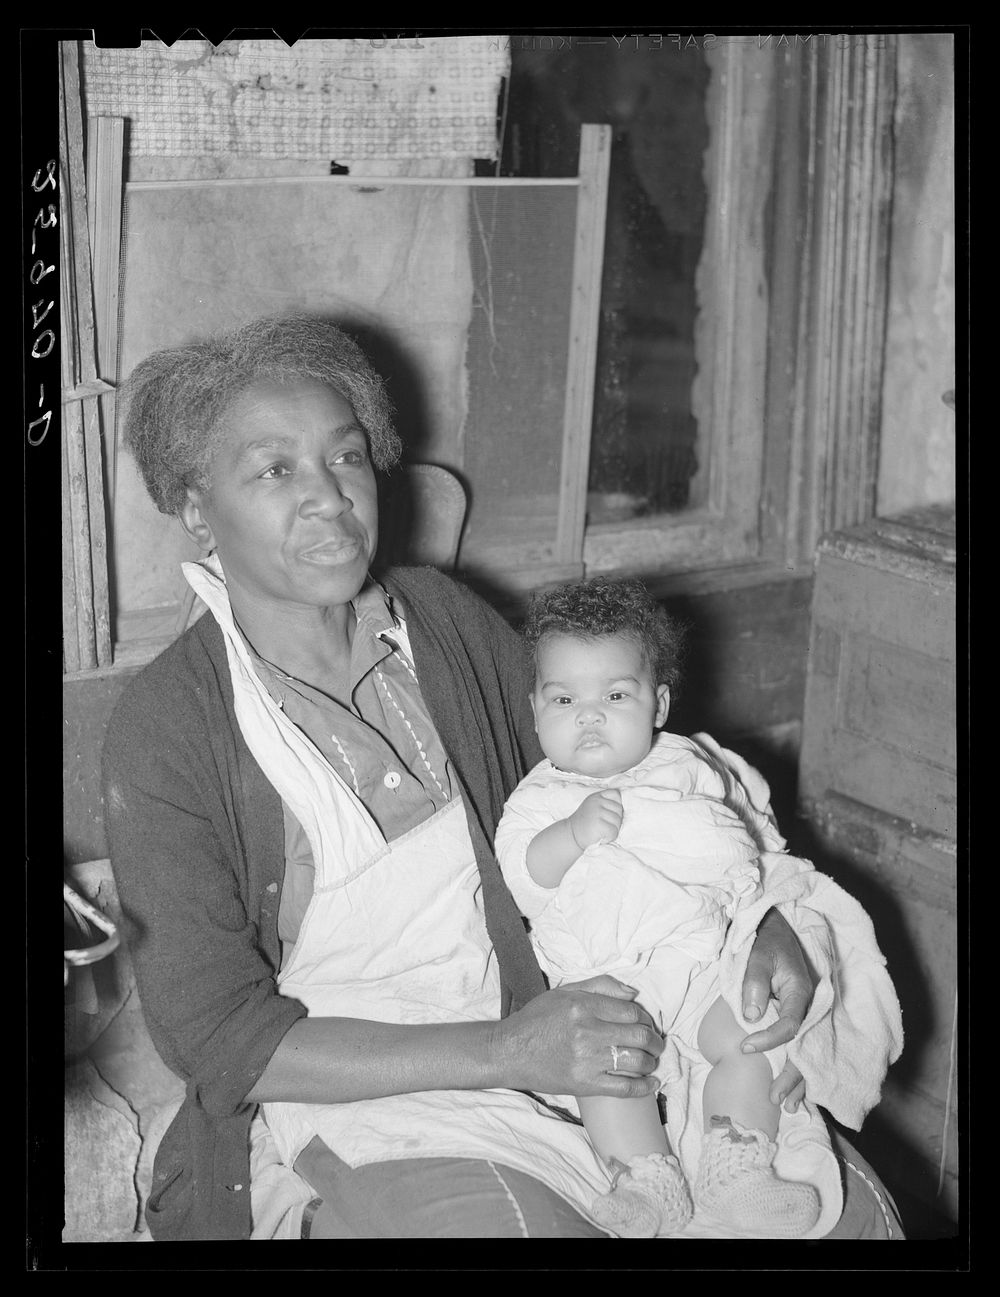  woman and baby. Washington, D.C.. Sourced from the Library of Congress.